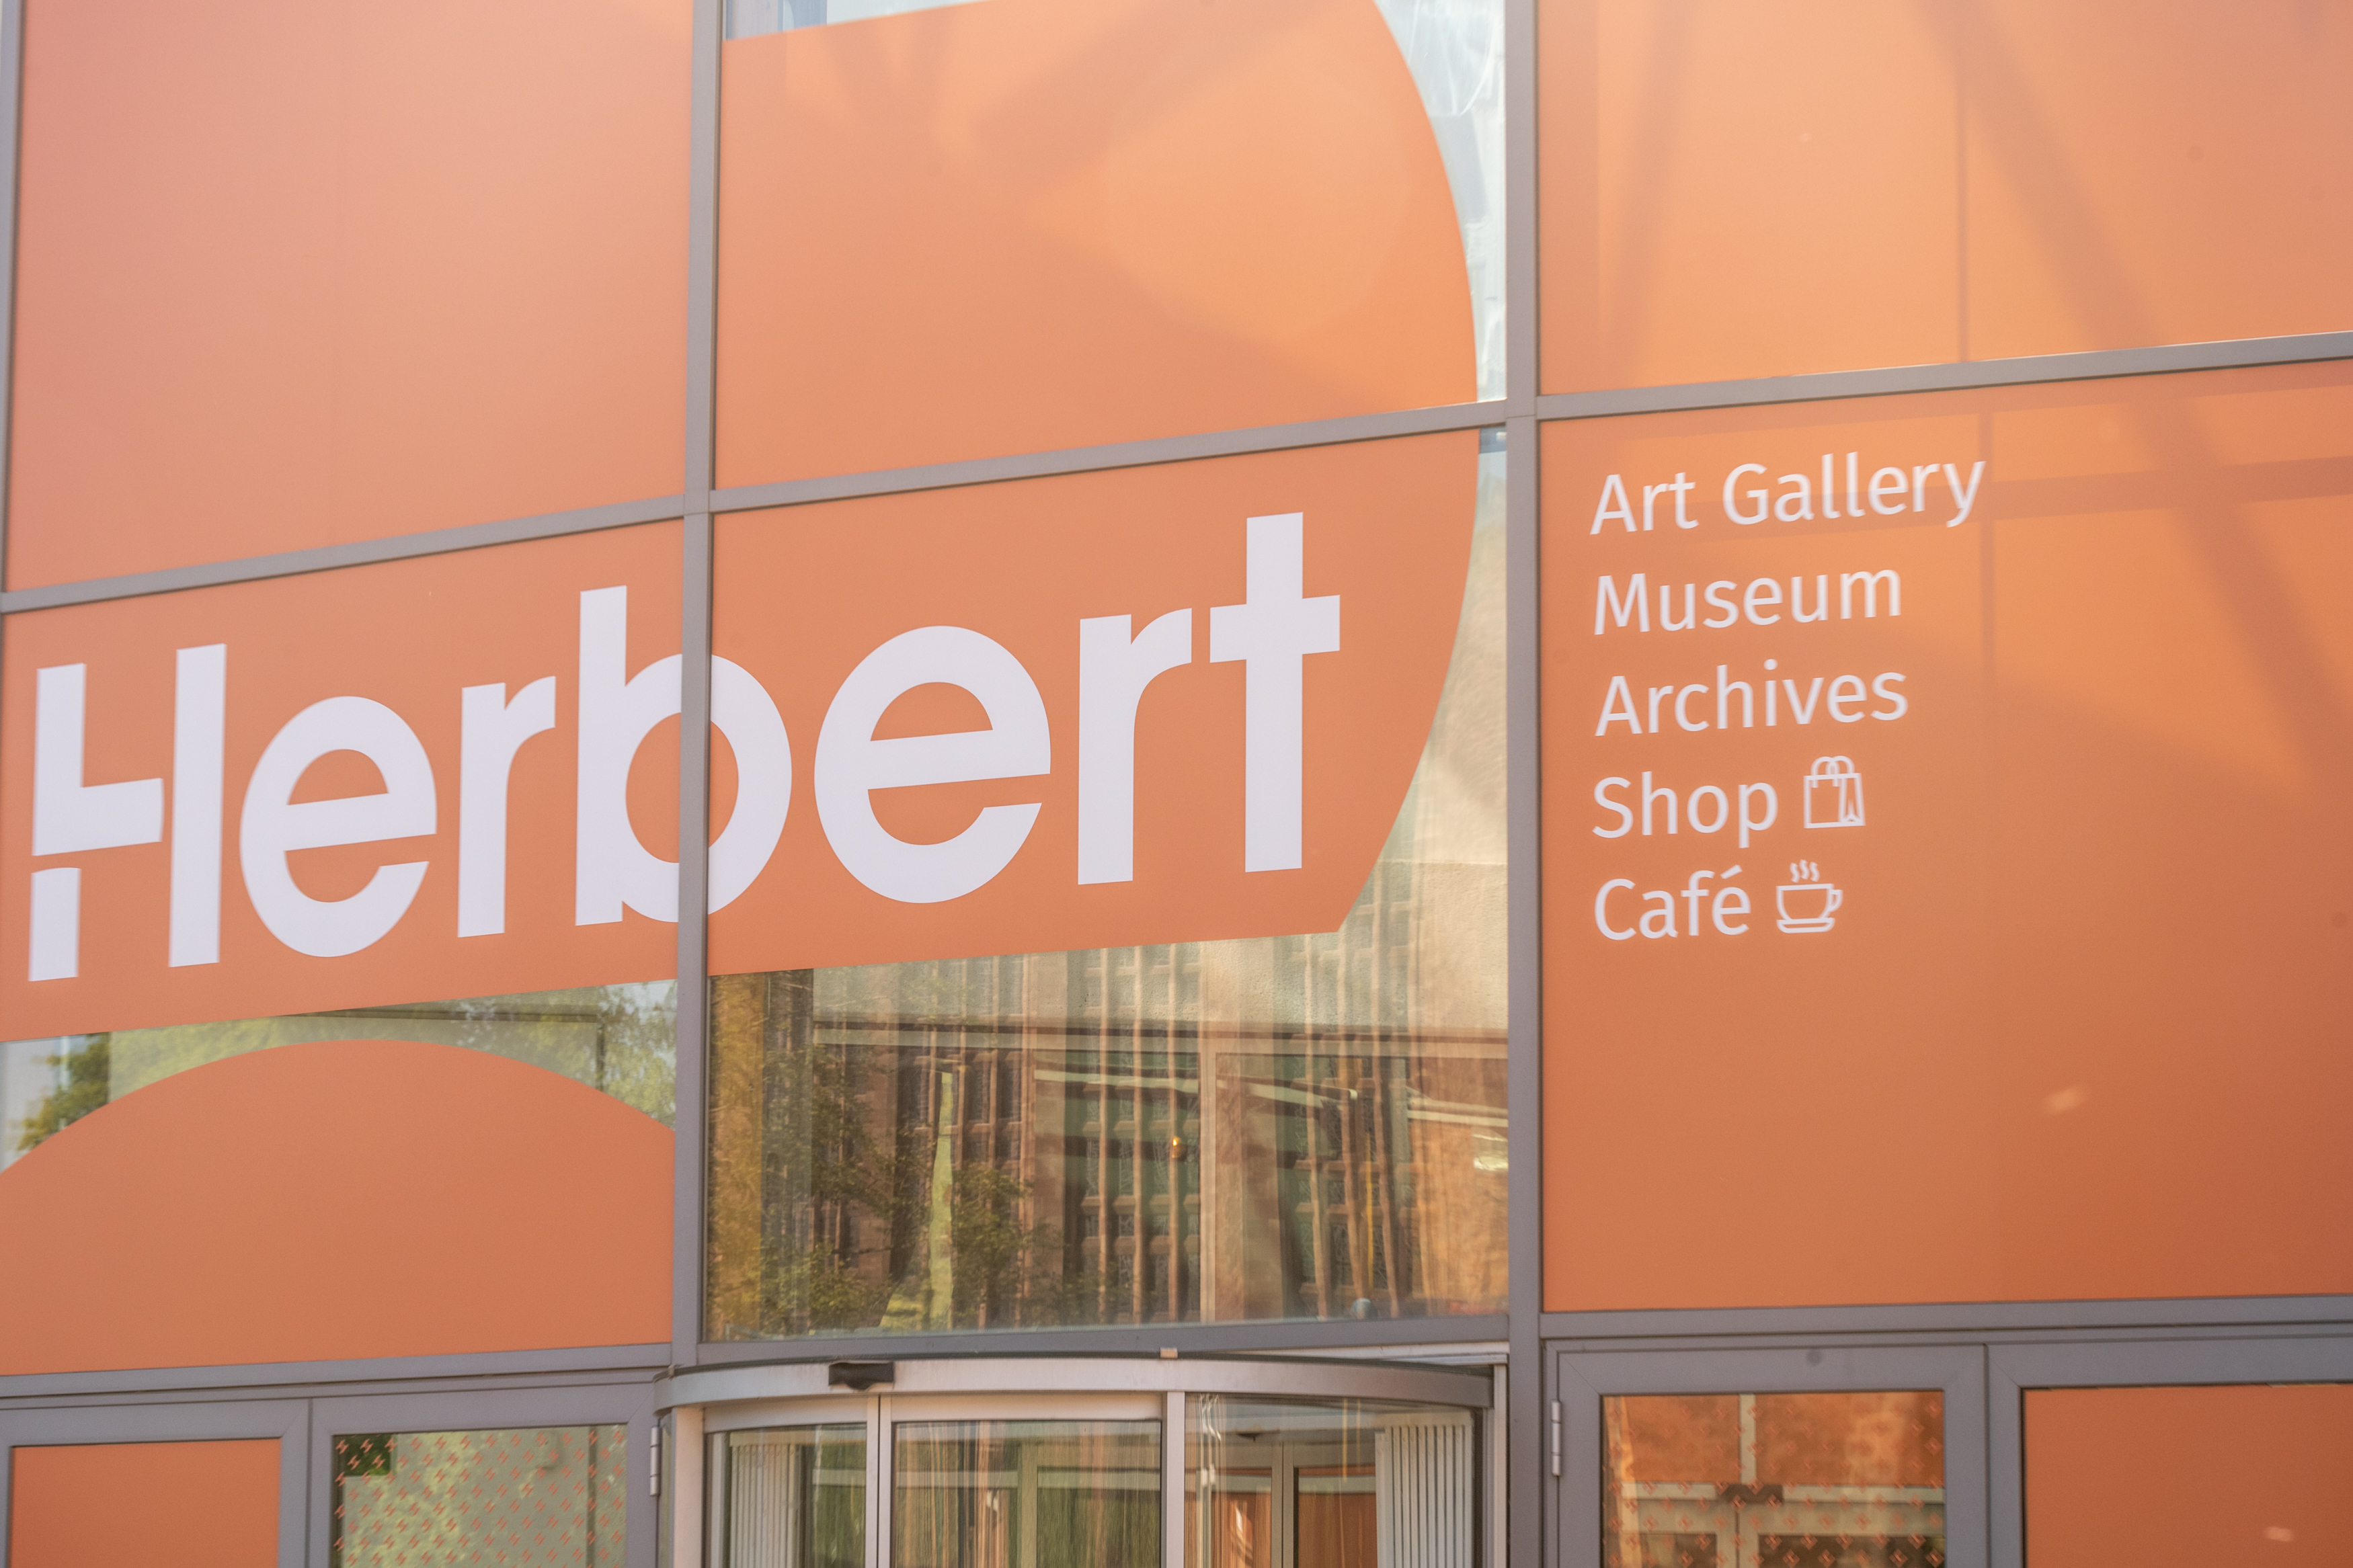 A photograph of the front of the Herbert Art Gallery & Museum